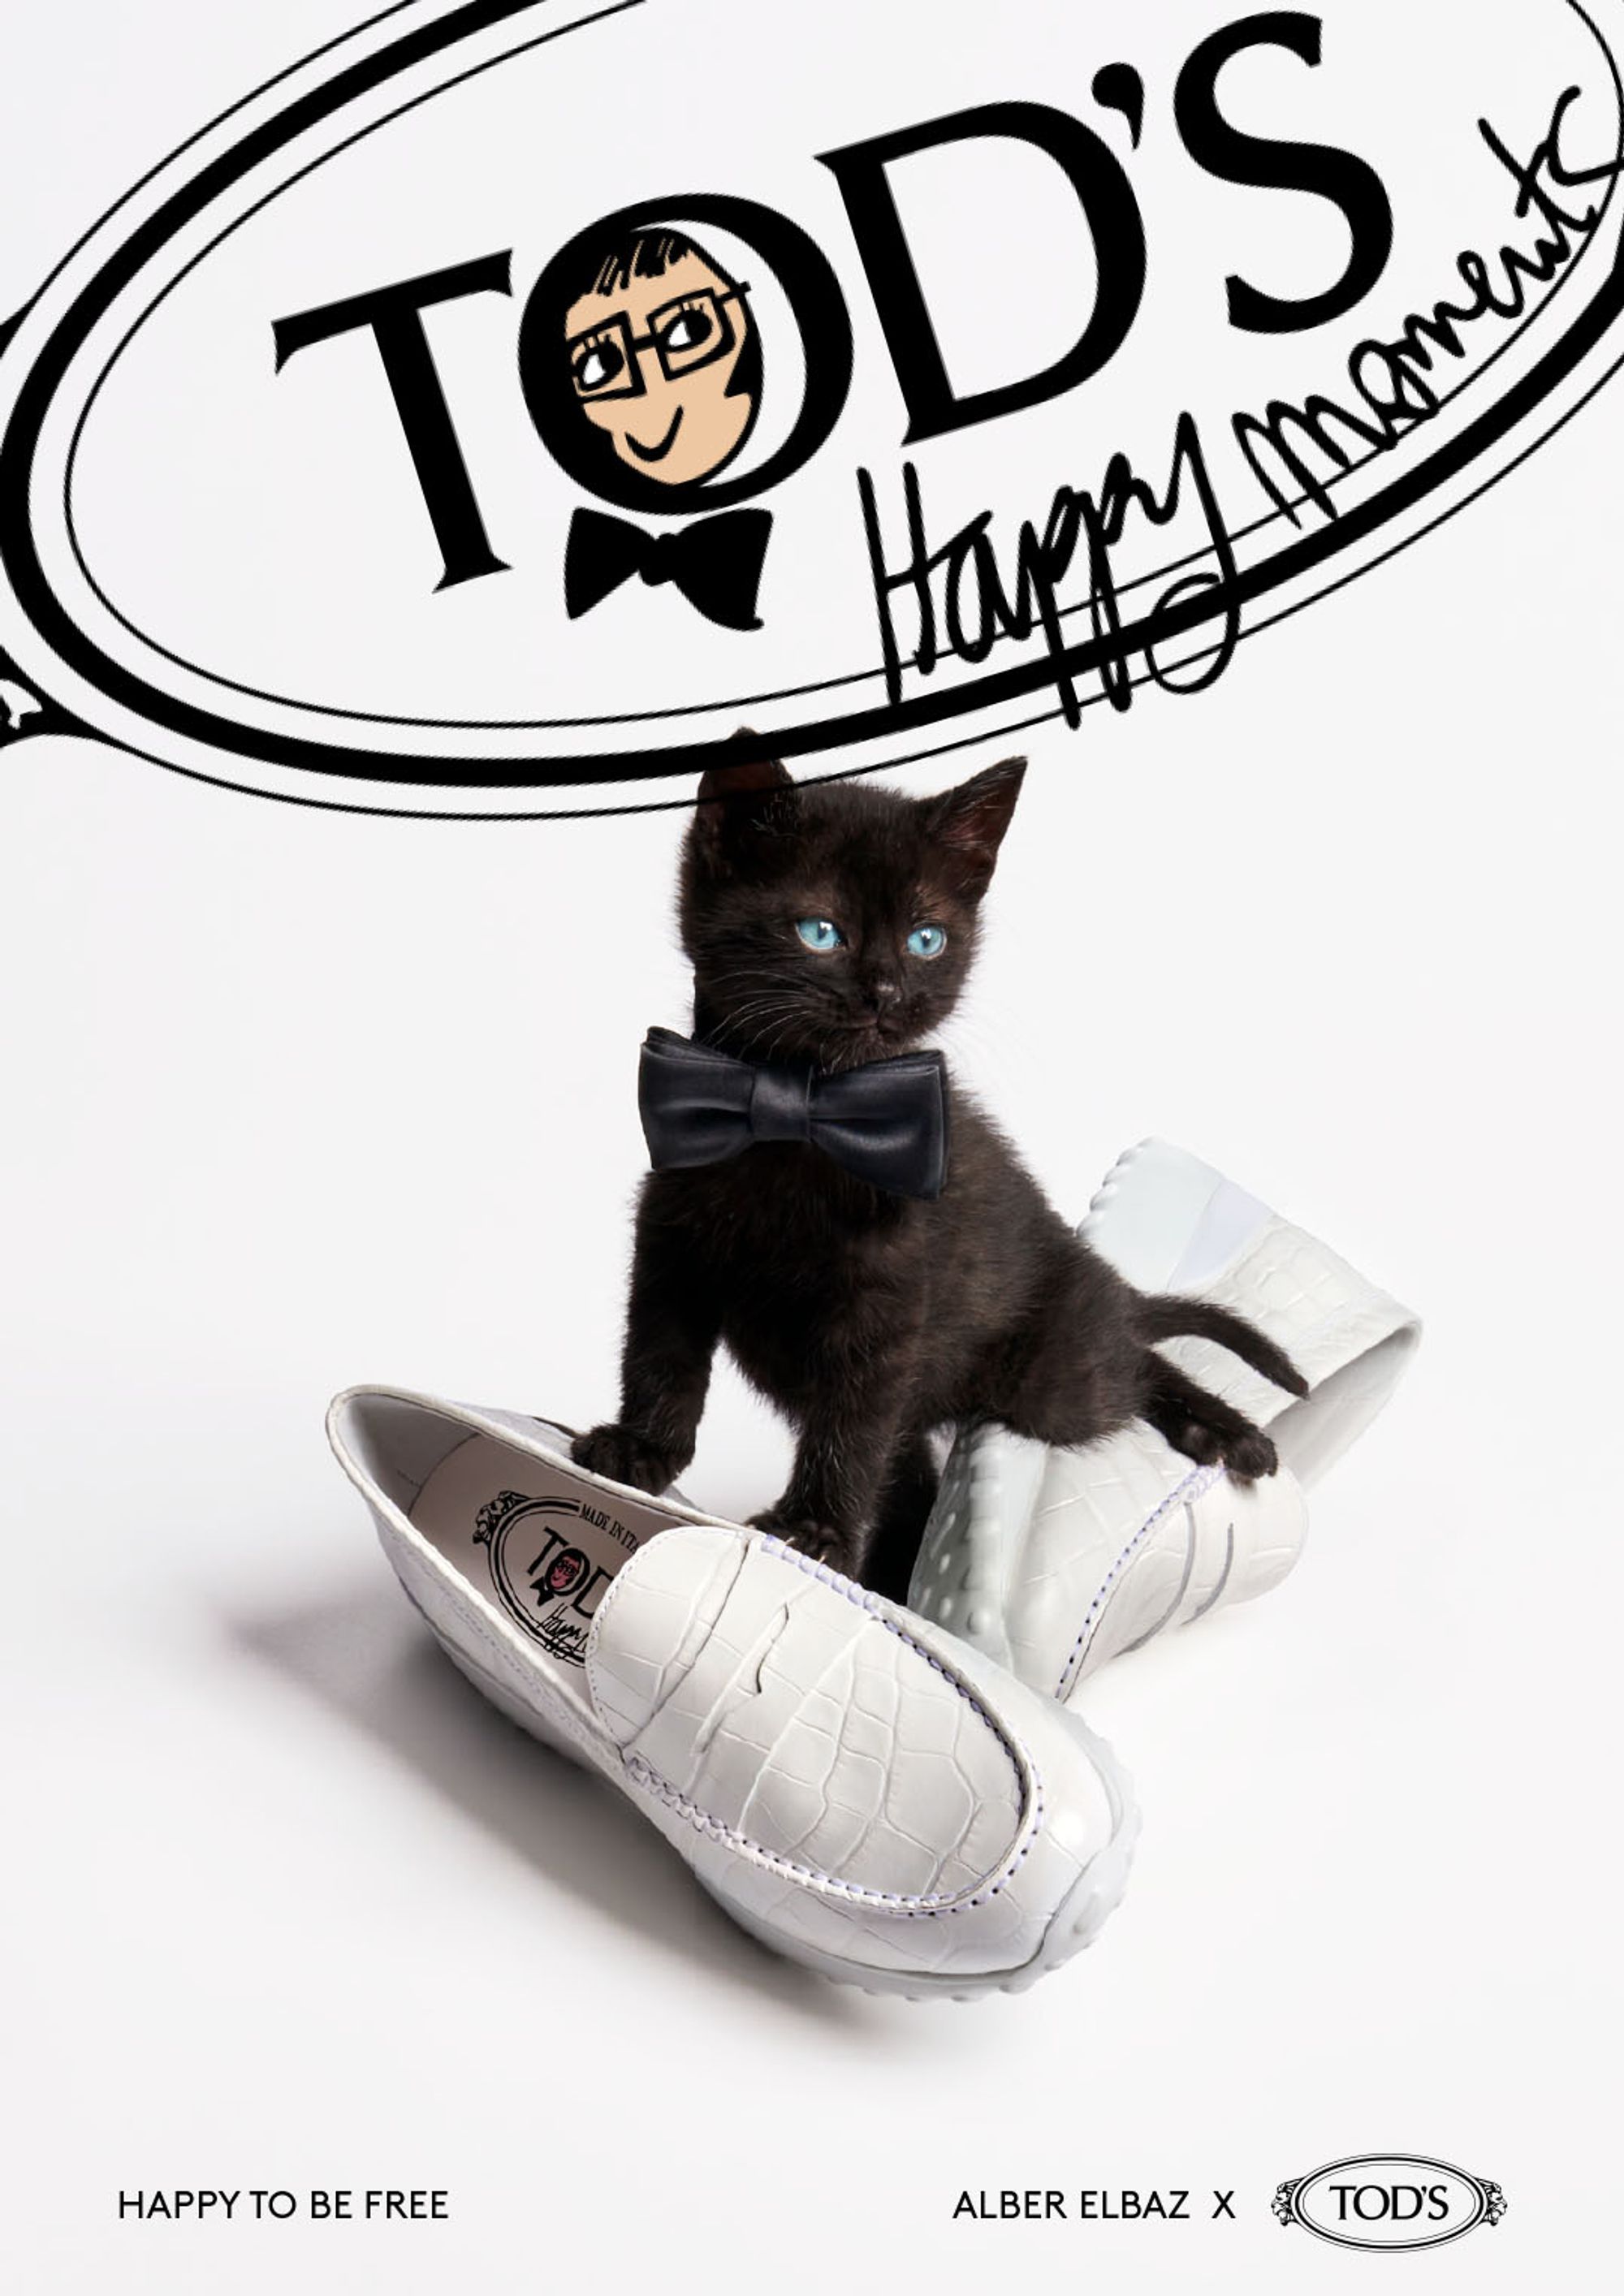 CREATIVE DIRECTION – ADVERTISING CAMPAIGN ALBER ELBAZ X TOD’S HAPPY MOMENTS